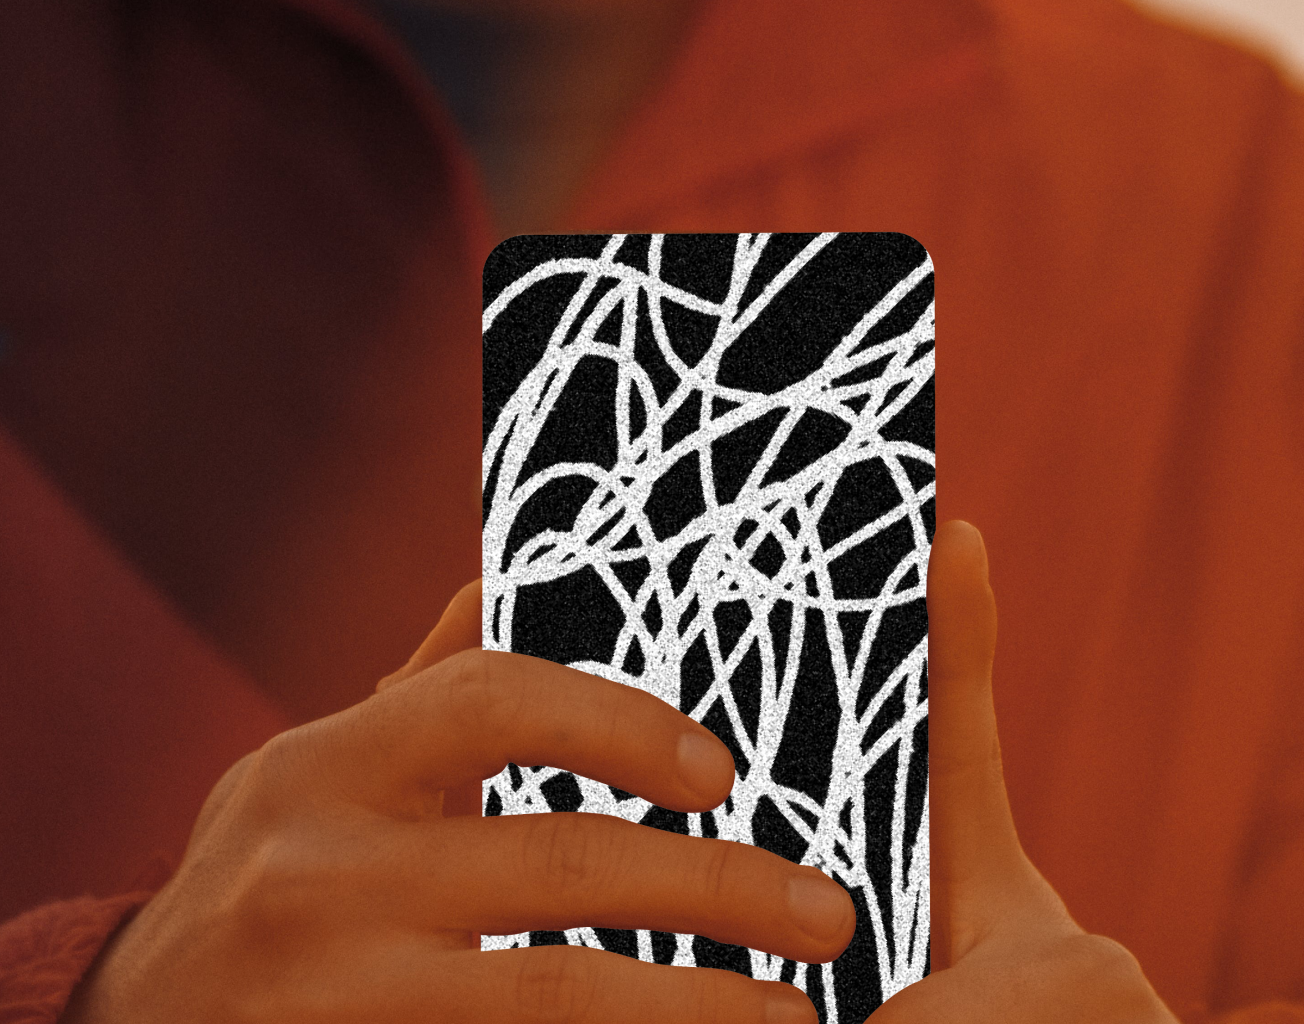 An image of a person holding a phone that is obscured by abstract scribbes